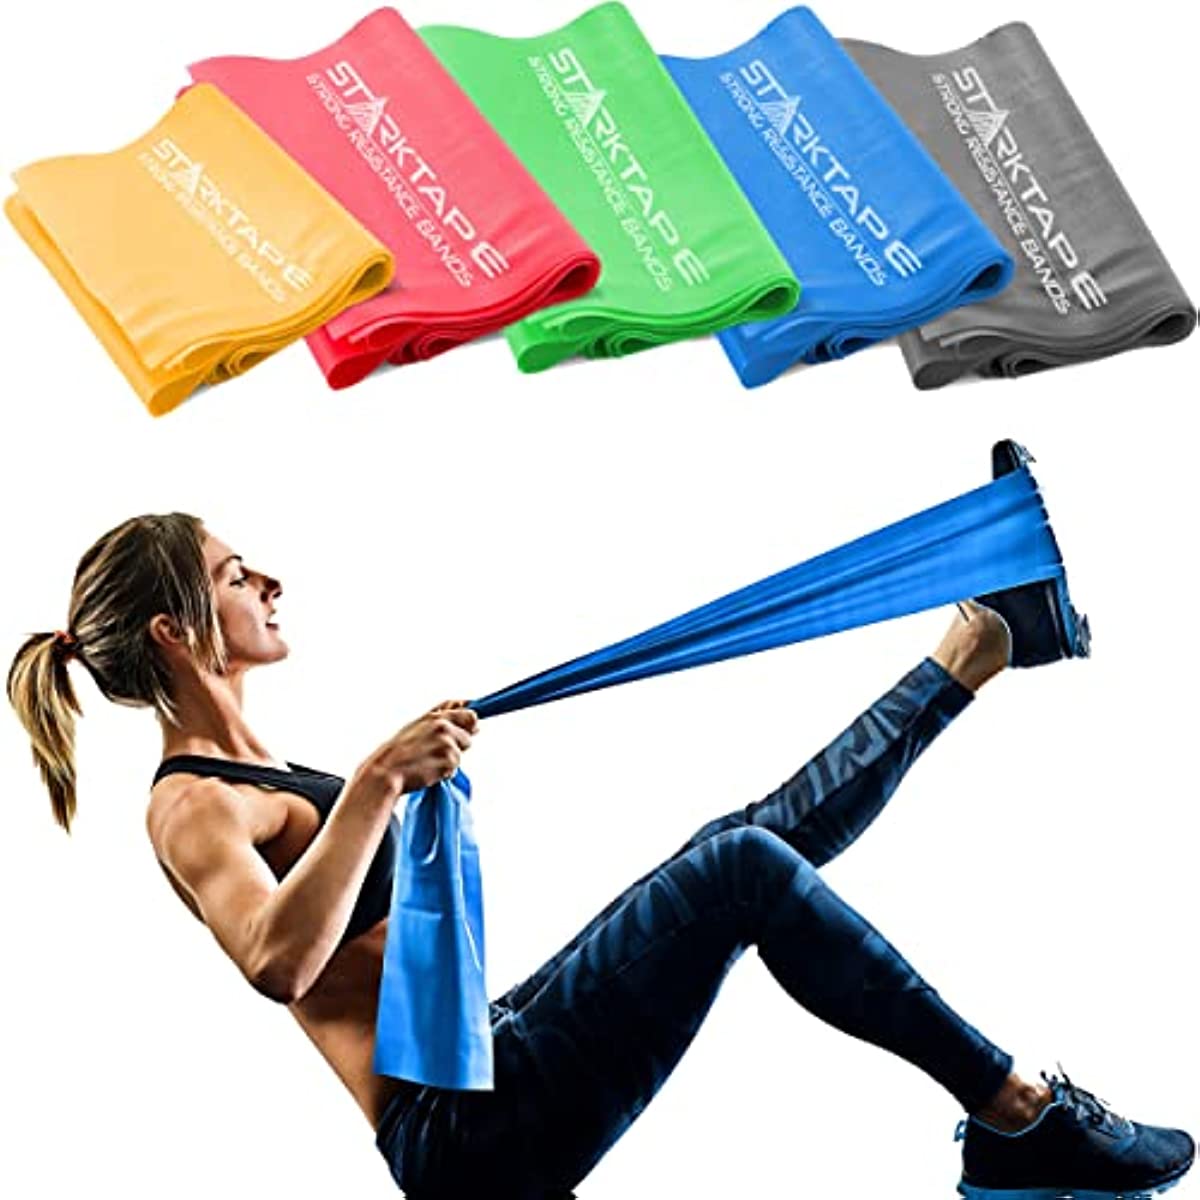 Starktape Resistance Bands. 100{8194103847433995e1cb6bdb912cbbc6f5cef284025d1356308502d77c15ef77} Malaysian Natural Latex Band. Perfect for Physical Therapy, Home Exercise, Yoga, Pilates, Gym, Rehab Training. No Scent, No Powder